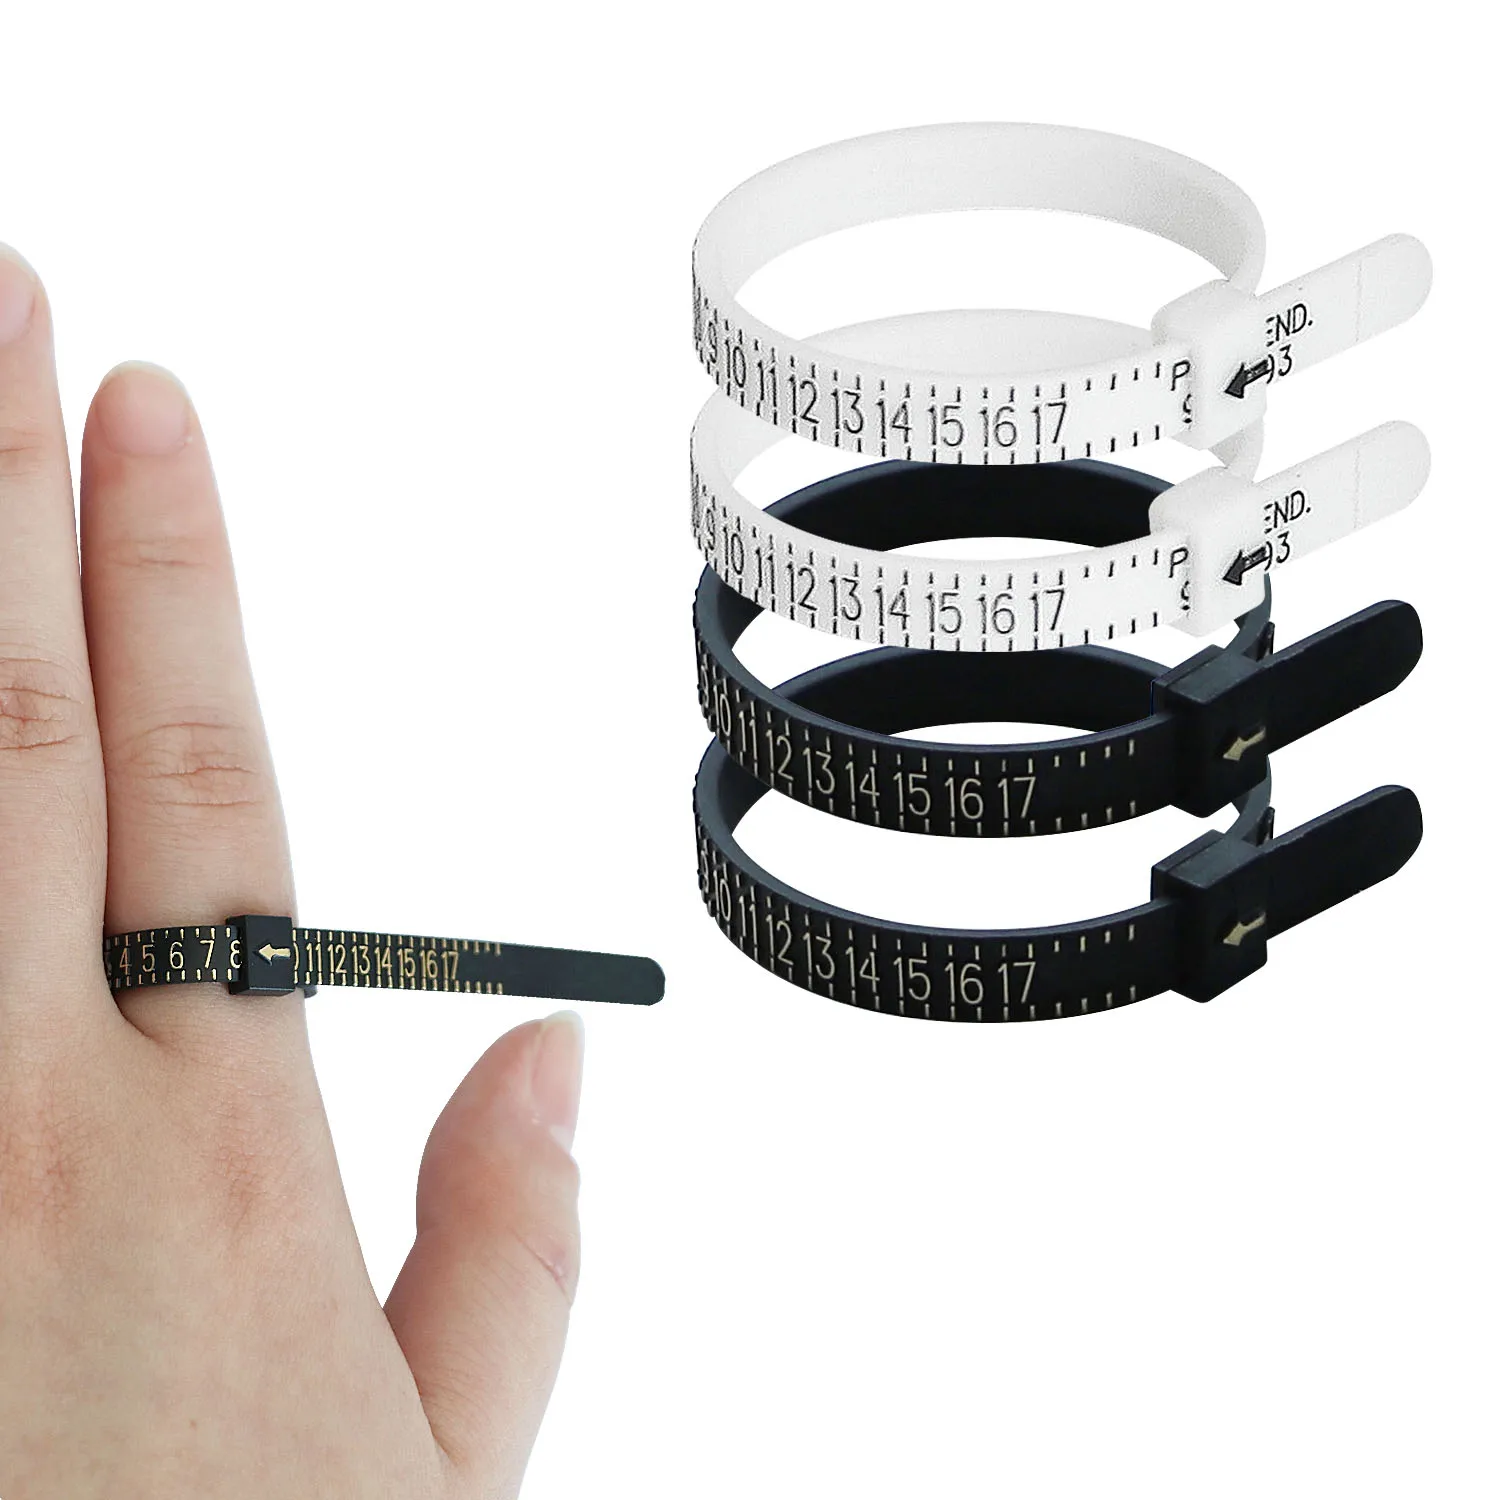 

US Ring Sizer Measuring Set Reusable Finger Size Gauge Measure Tool Jewelry Sizing Tools